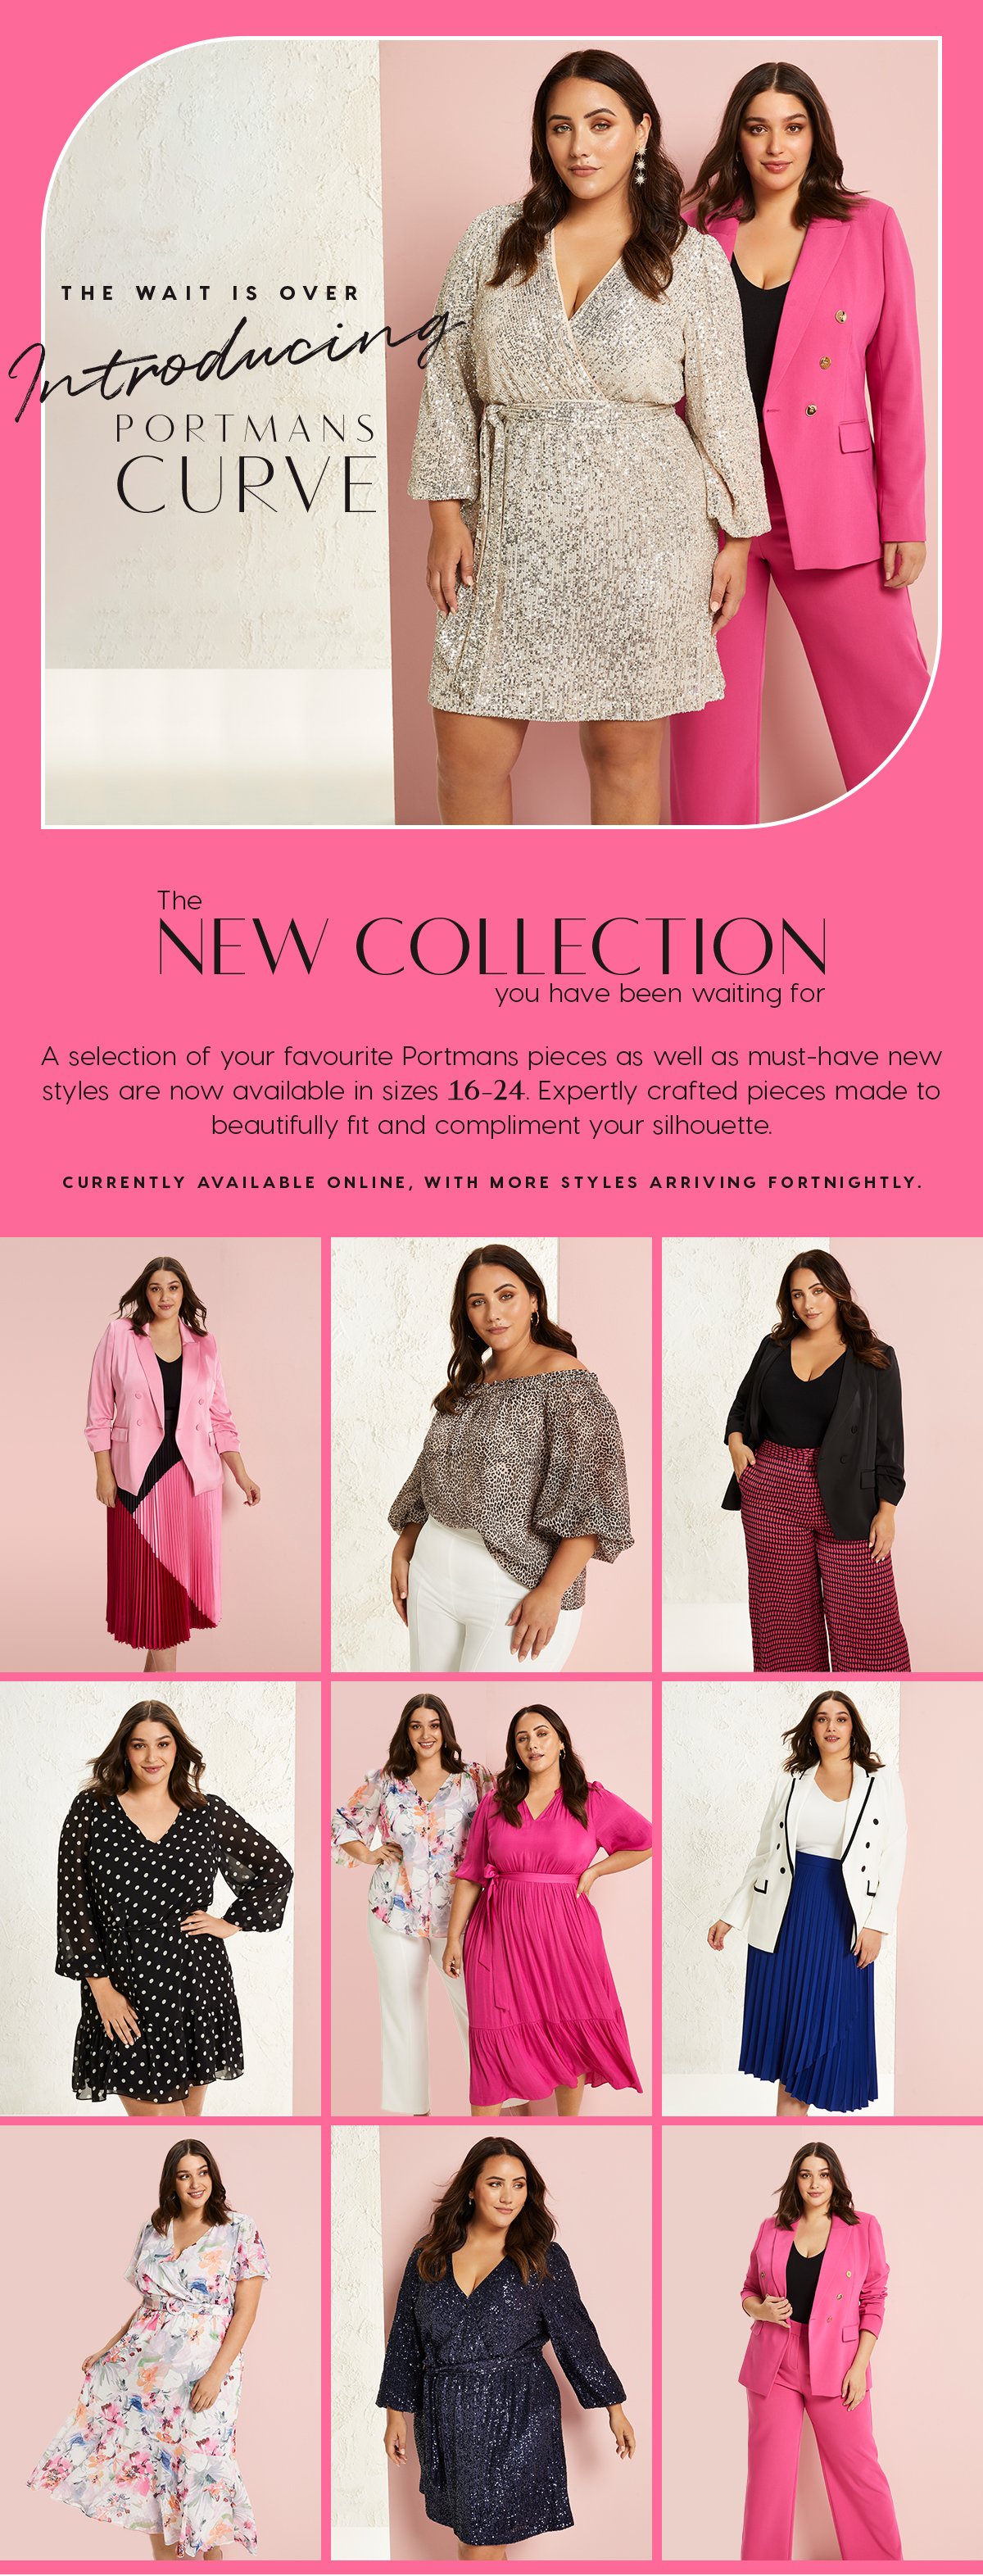 The wait is over. Introducing Portman's Curve. The New Collection You've Been Waiting For. A selection of your favourite Portmans pieces as well as must-have new styles are now available in sizes 16-24. Expertly crafted pieces made to beautifully fit and compliment your silhouette.   Currently available online, with more styles arriving fortnightly.